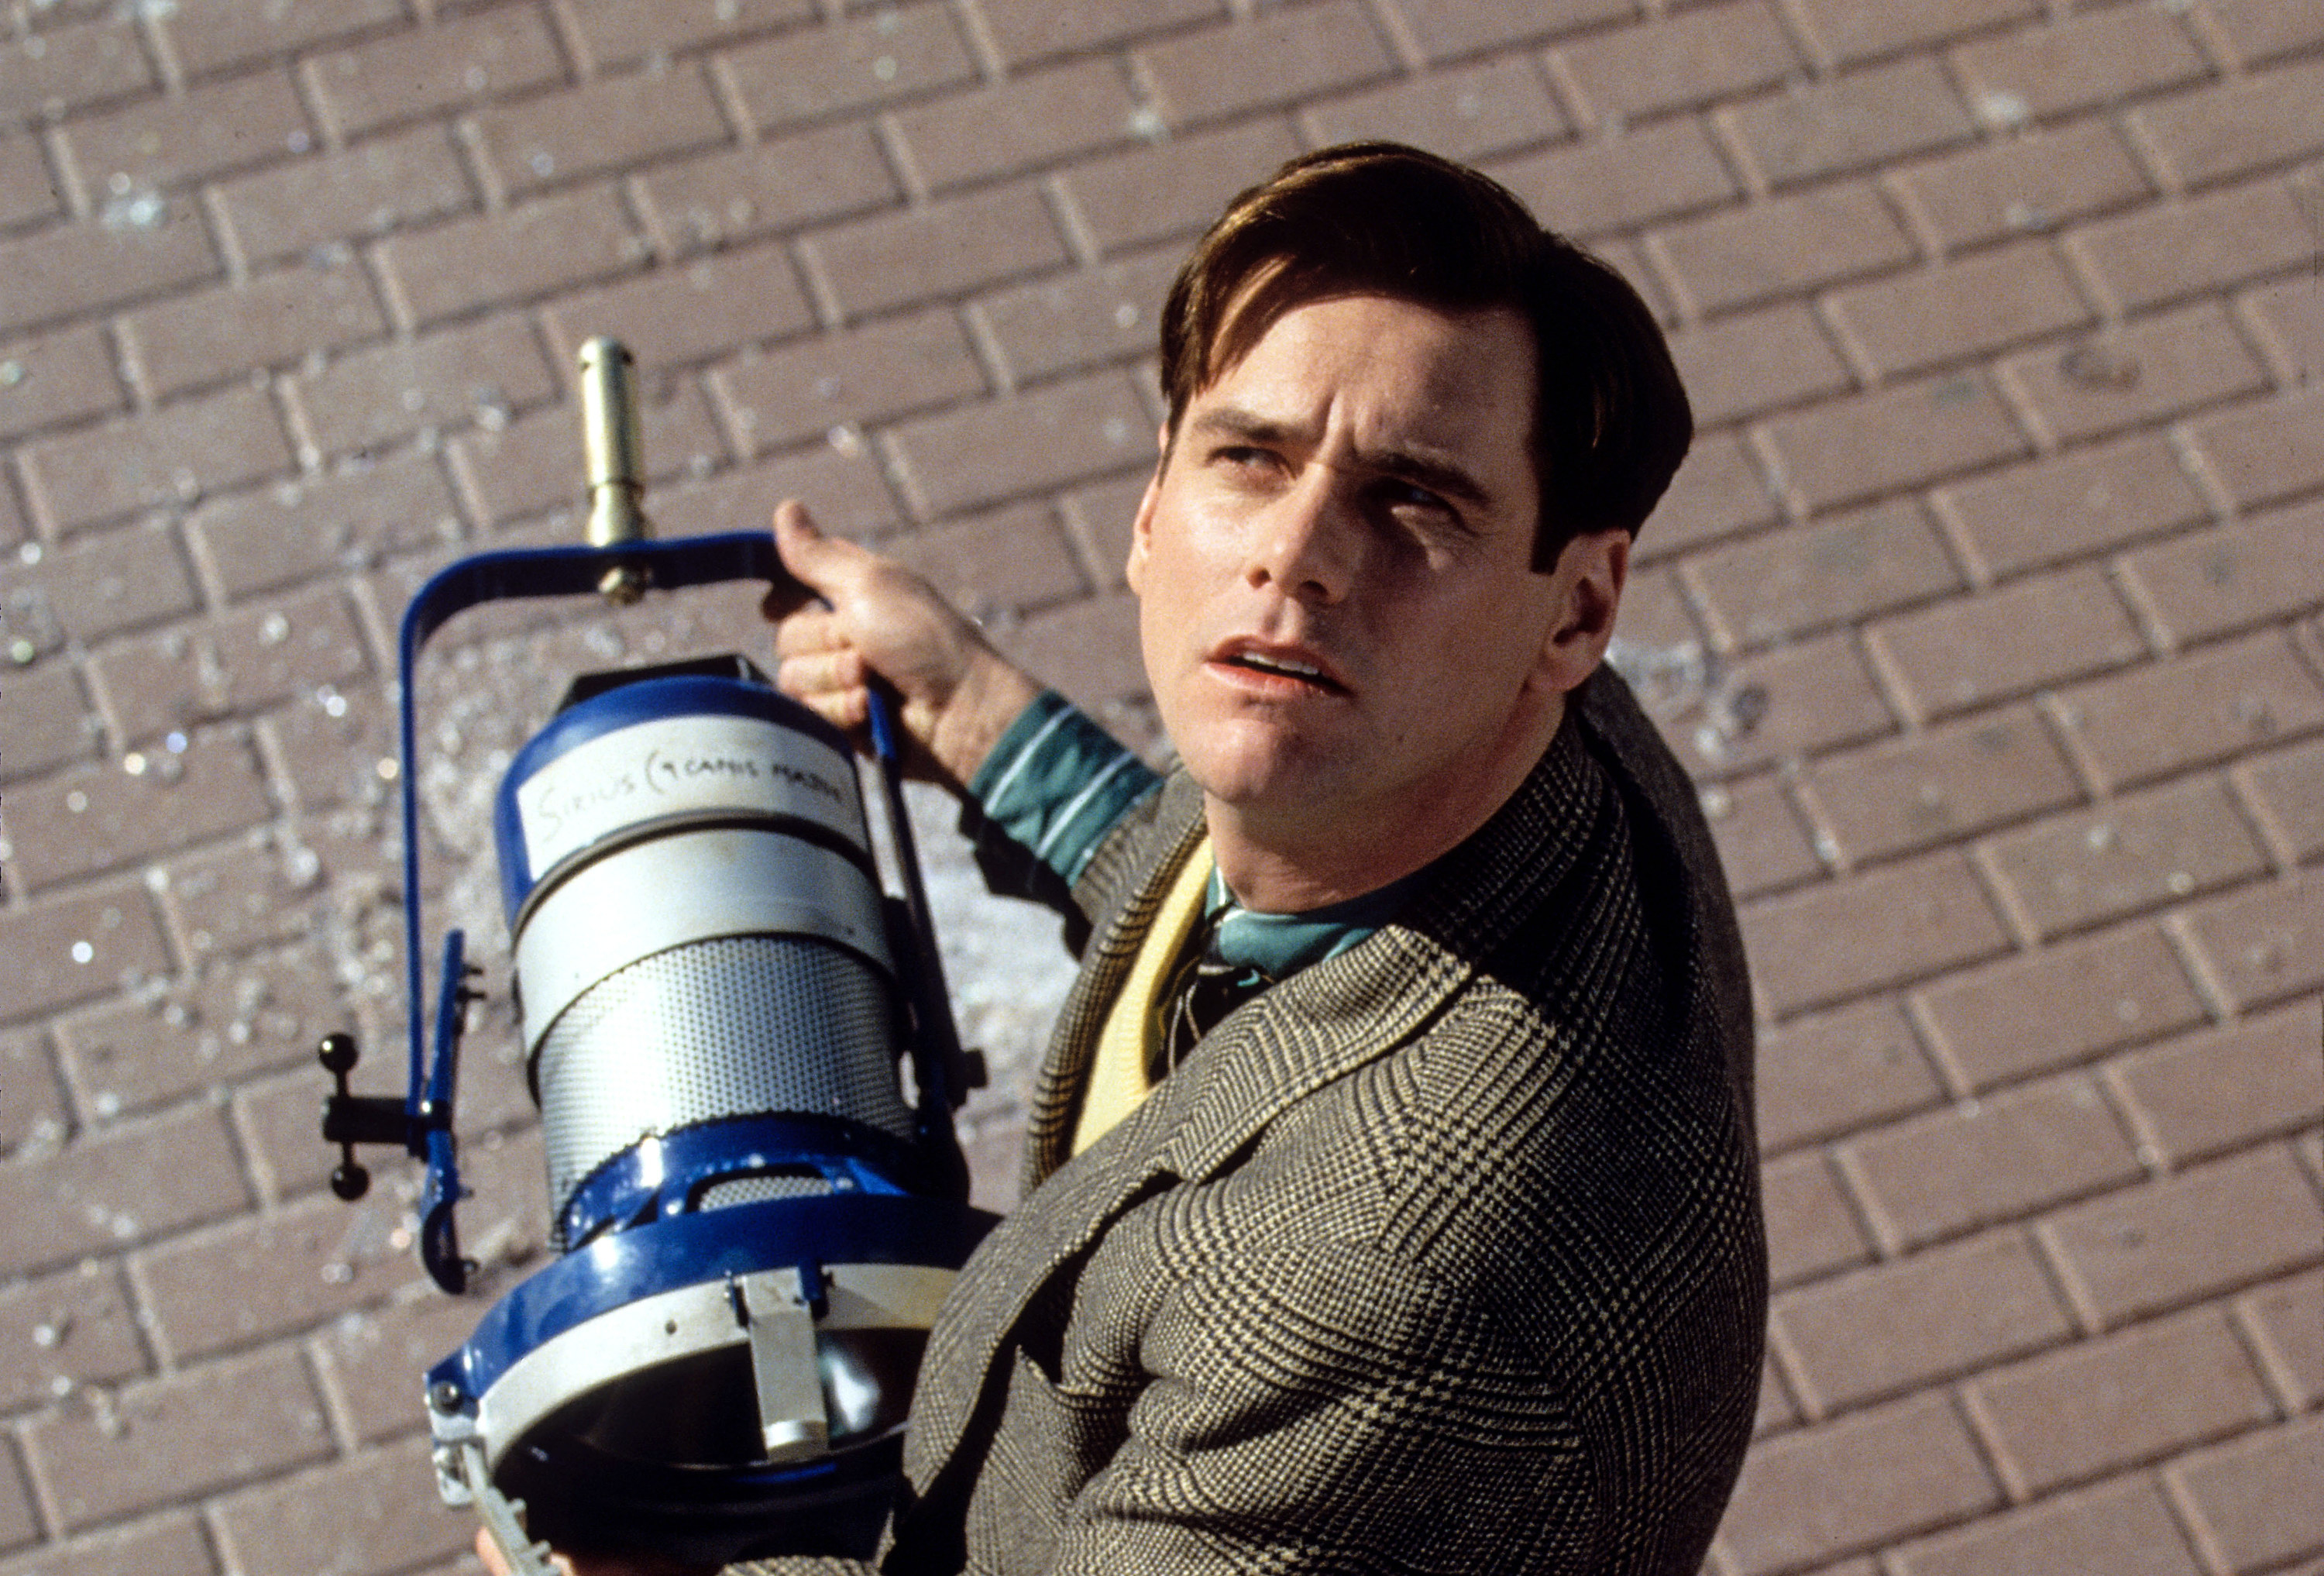 Jim Carrey holding a television set light and looking up suspiciously